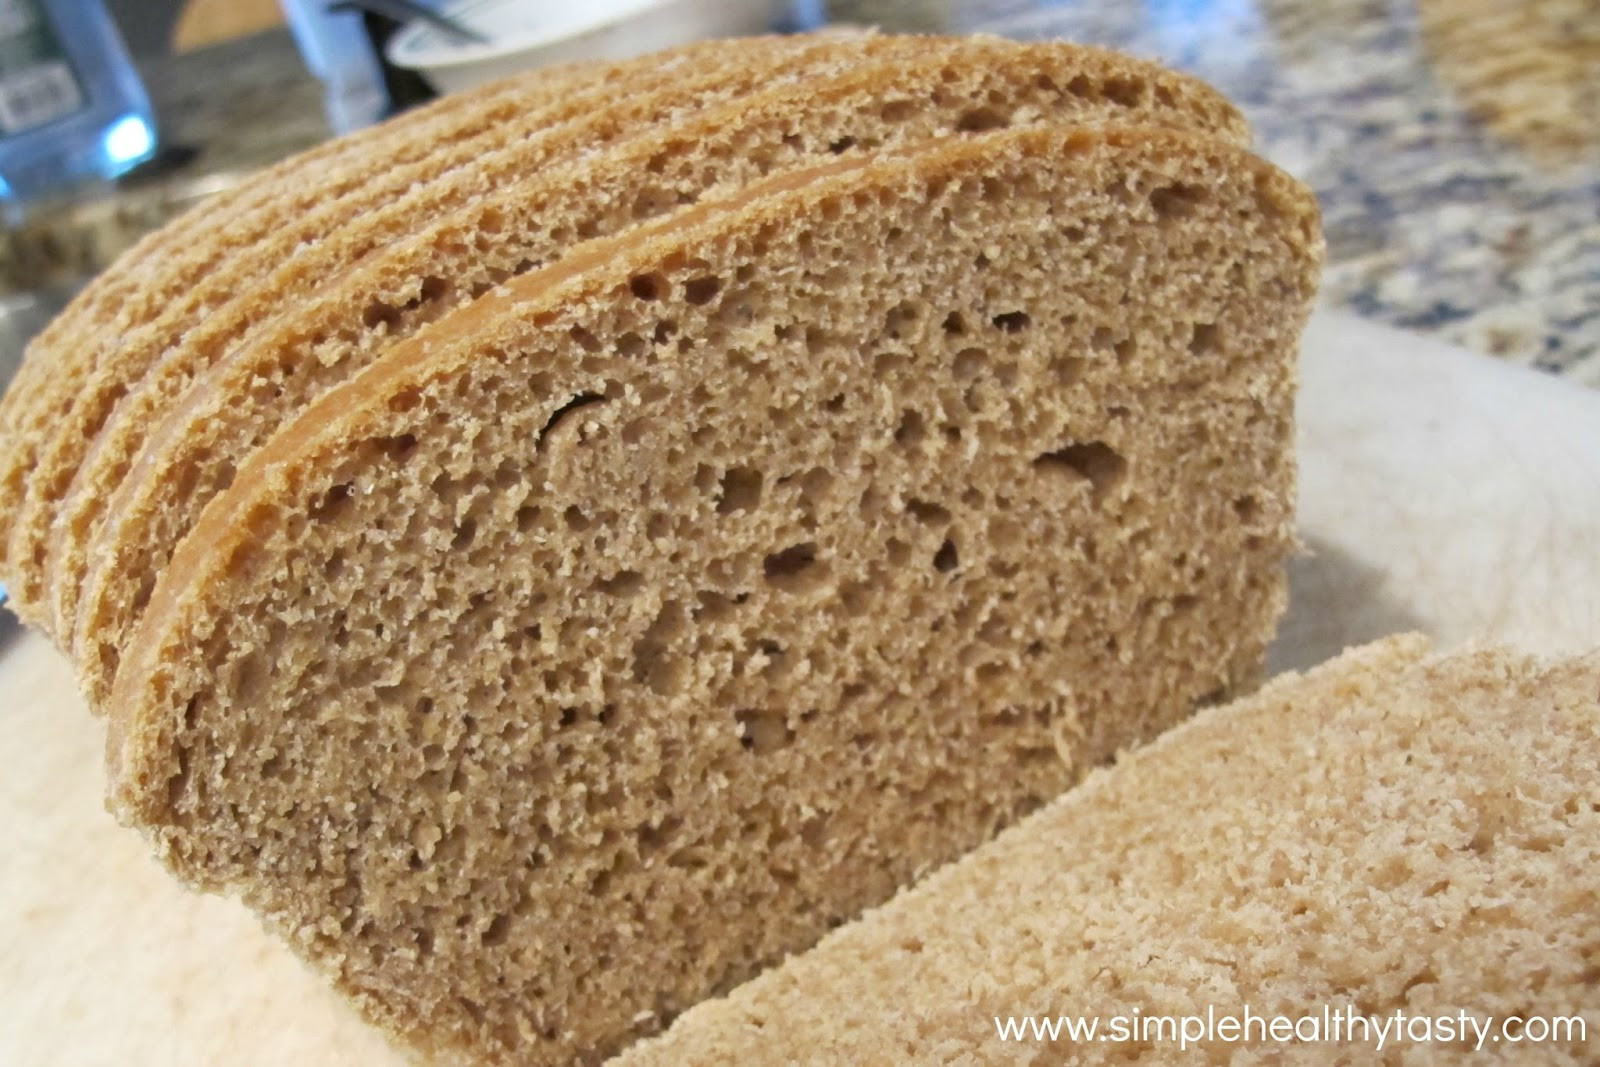 Making Bread Without Yeast
 Simple Healthy Tasty Sourdough Making bread